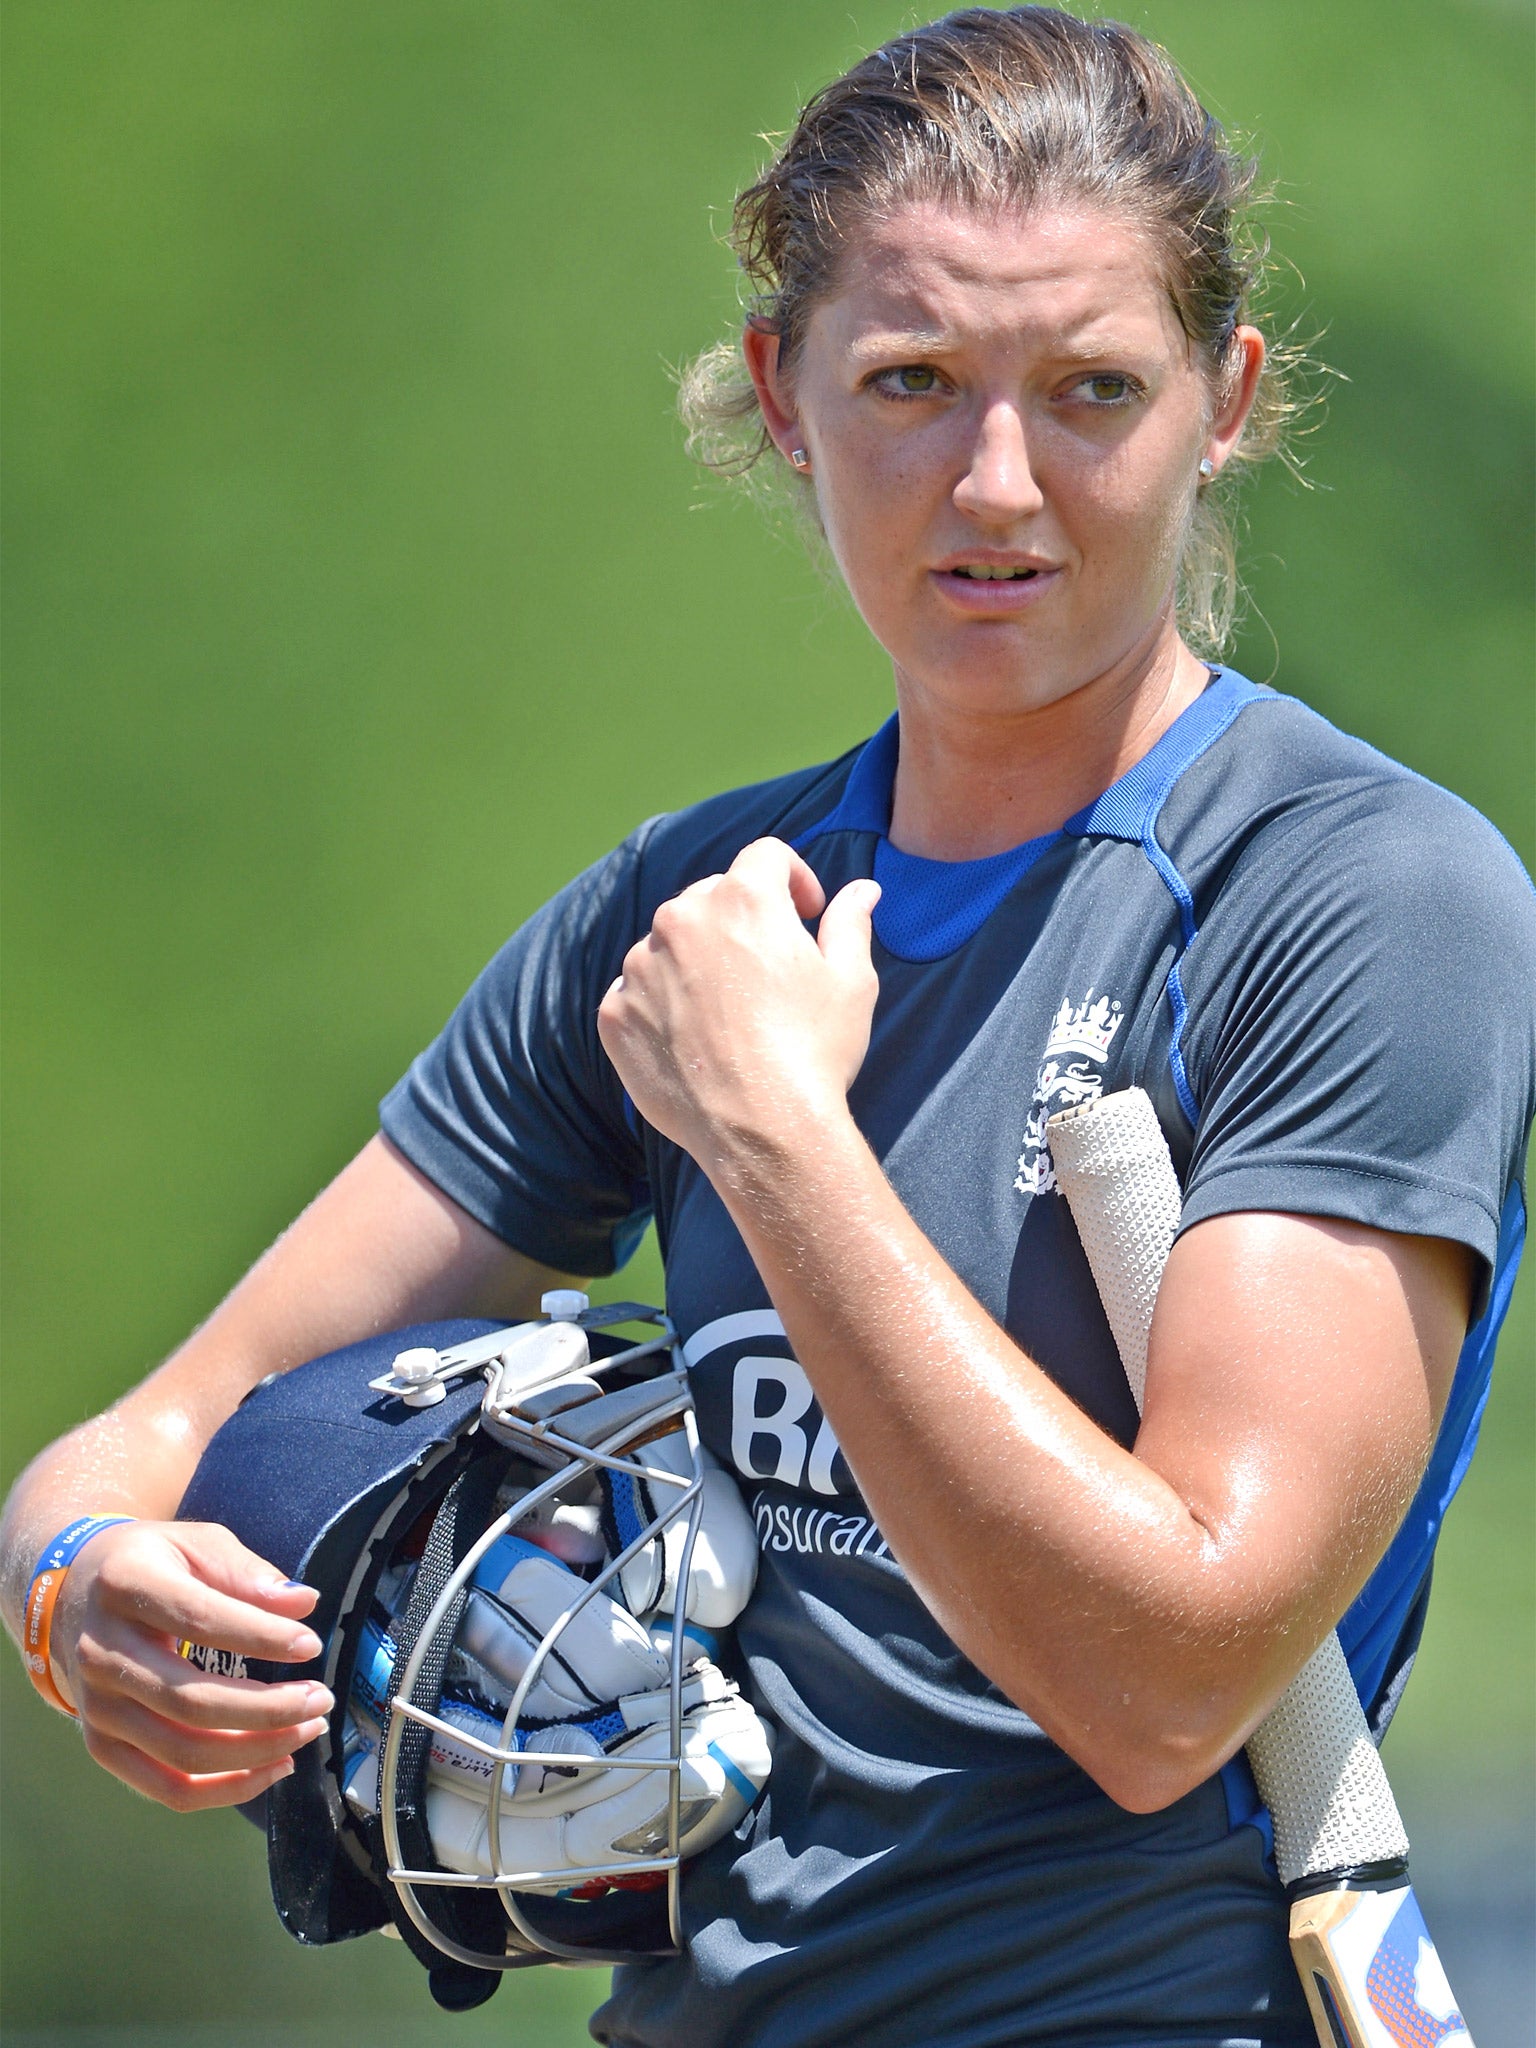 Sarah Taylor will play for Sussex County Cricket Club’s second
team